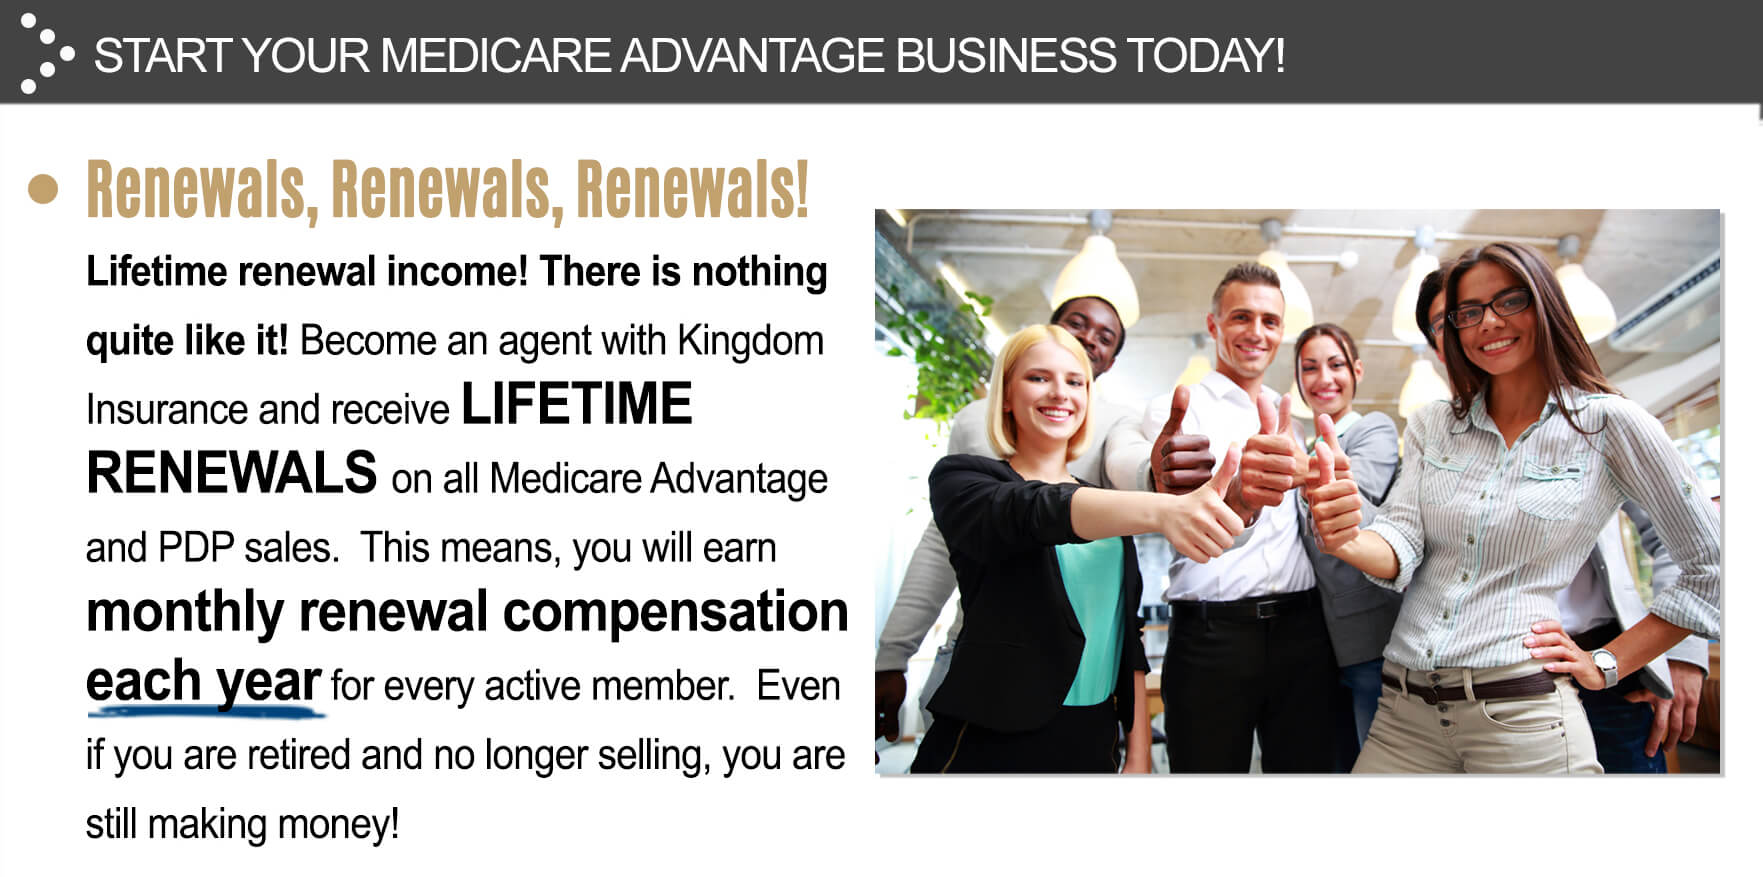 Renewals, Renewals, Renewals! Lifetime renewal income! There is nothing quite like it! Become an agent with Kingdom Insurance and receive lifetime renewals on all Medicare advantage and PDP sales. This means, you will earn monthly renewal compensation each year for every active member. Even if you are retired and no longer selling, you are still making money!